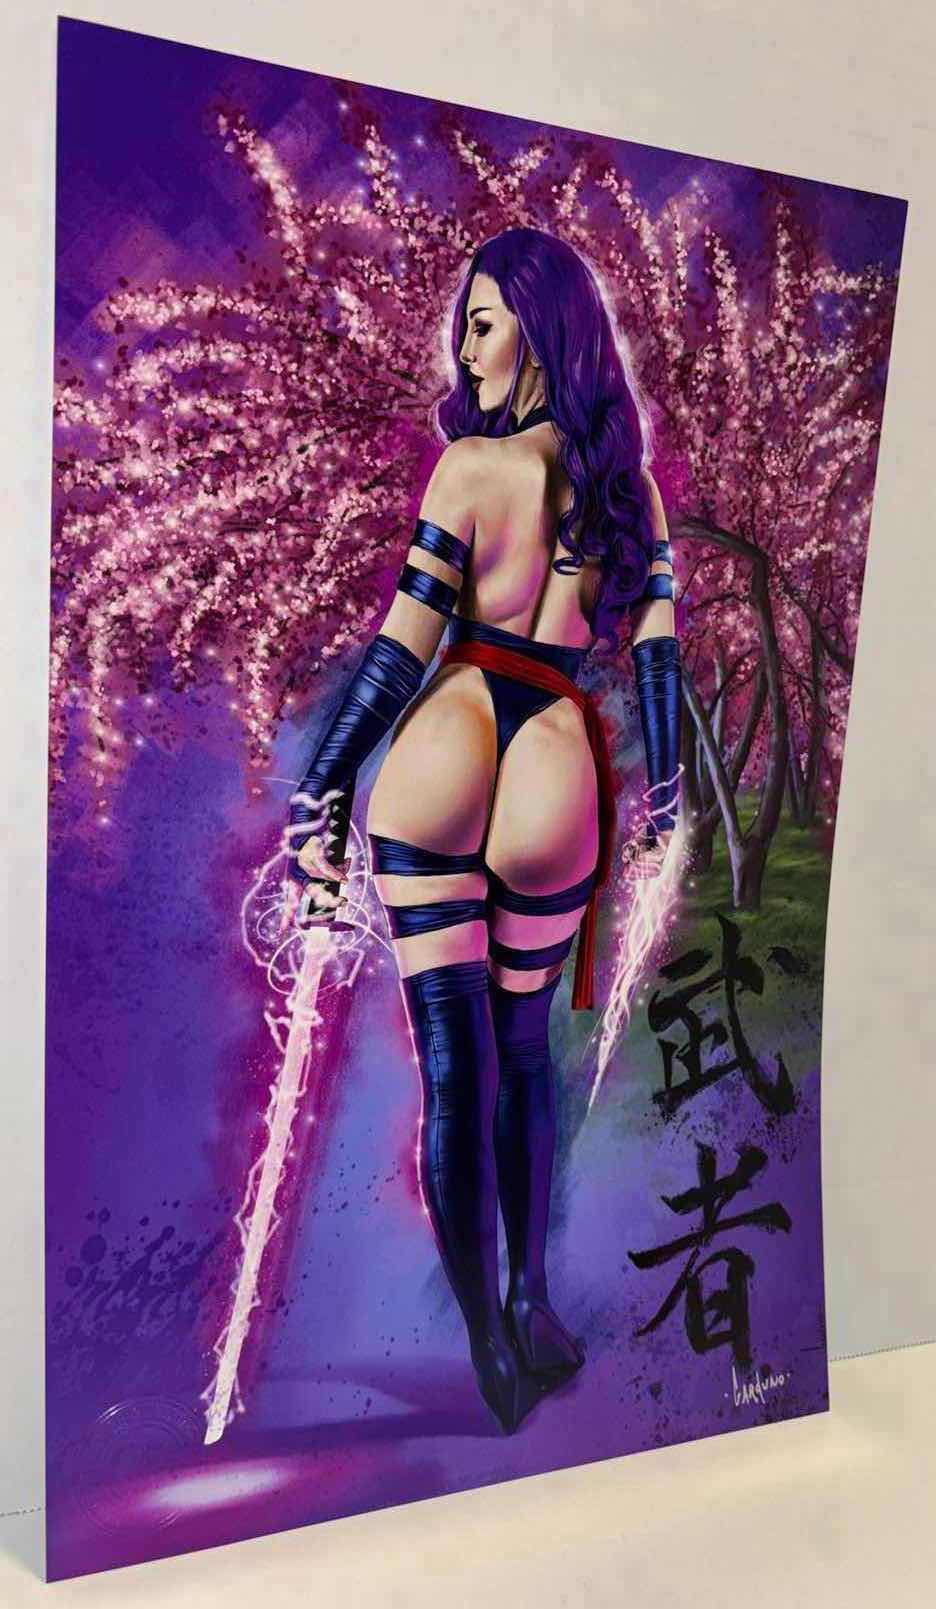 Photo 1 of VICTOR GARDUNO MORTAL KOMBAT MILEENA 11” X 17” INFINITY GLOSS UNFRAMED PRINT W EMBOSSED SEAL, DIGITAL SIGNATURE & OFFICIAL SIGNATURE W COA INCLUDED, STORED IN A RIGID PRINT PROTECTOR SLEEVE